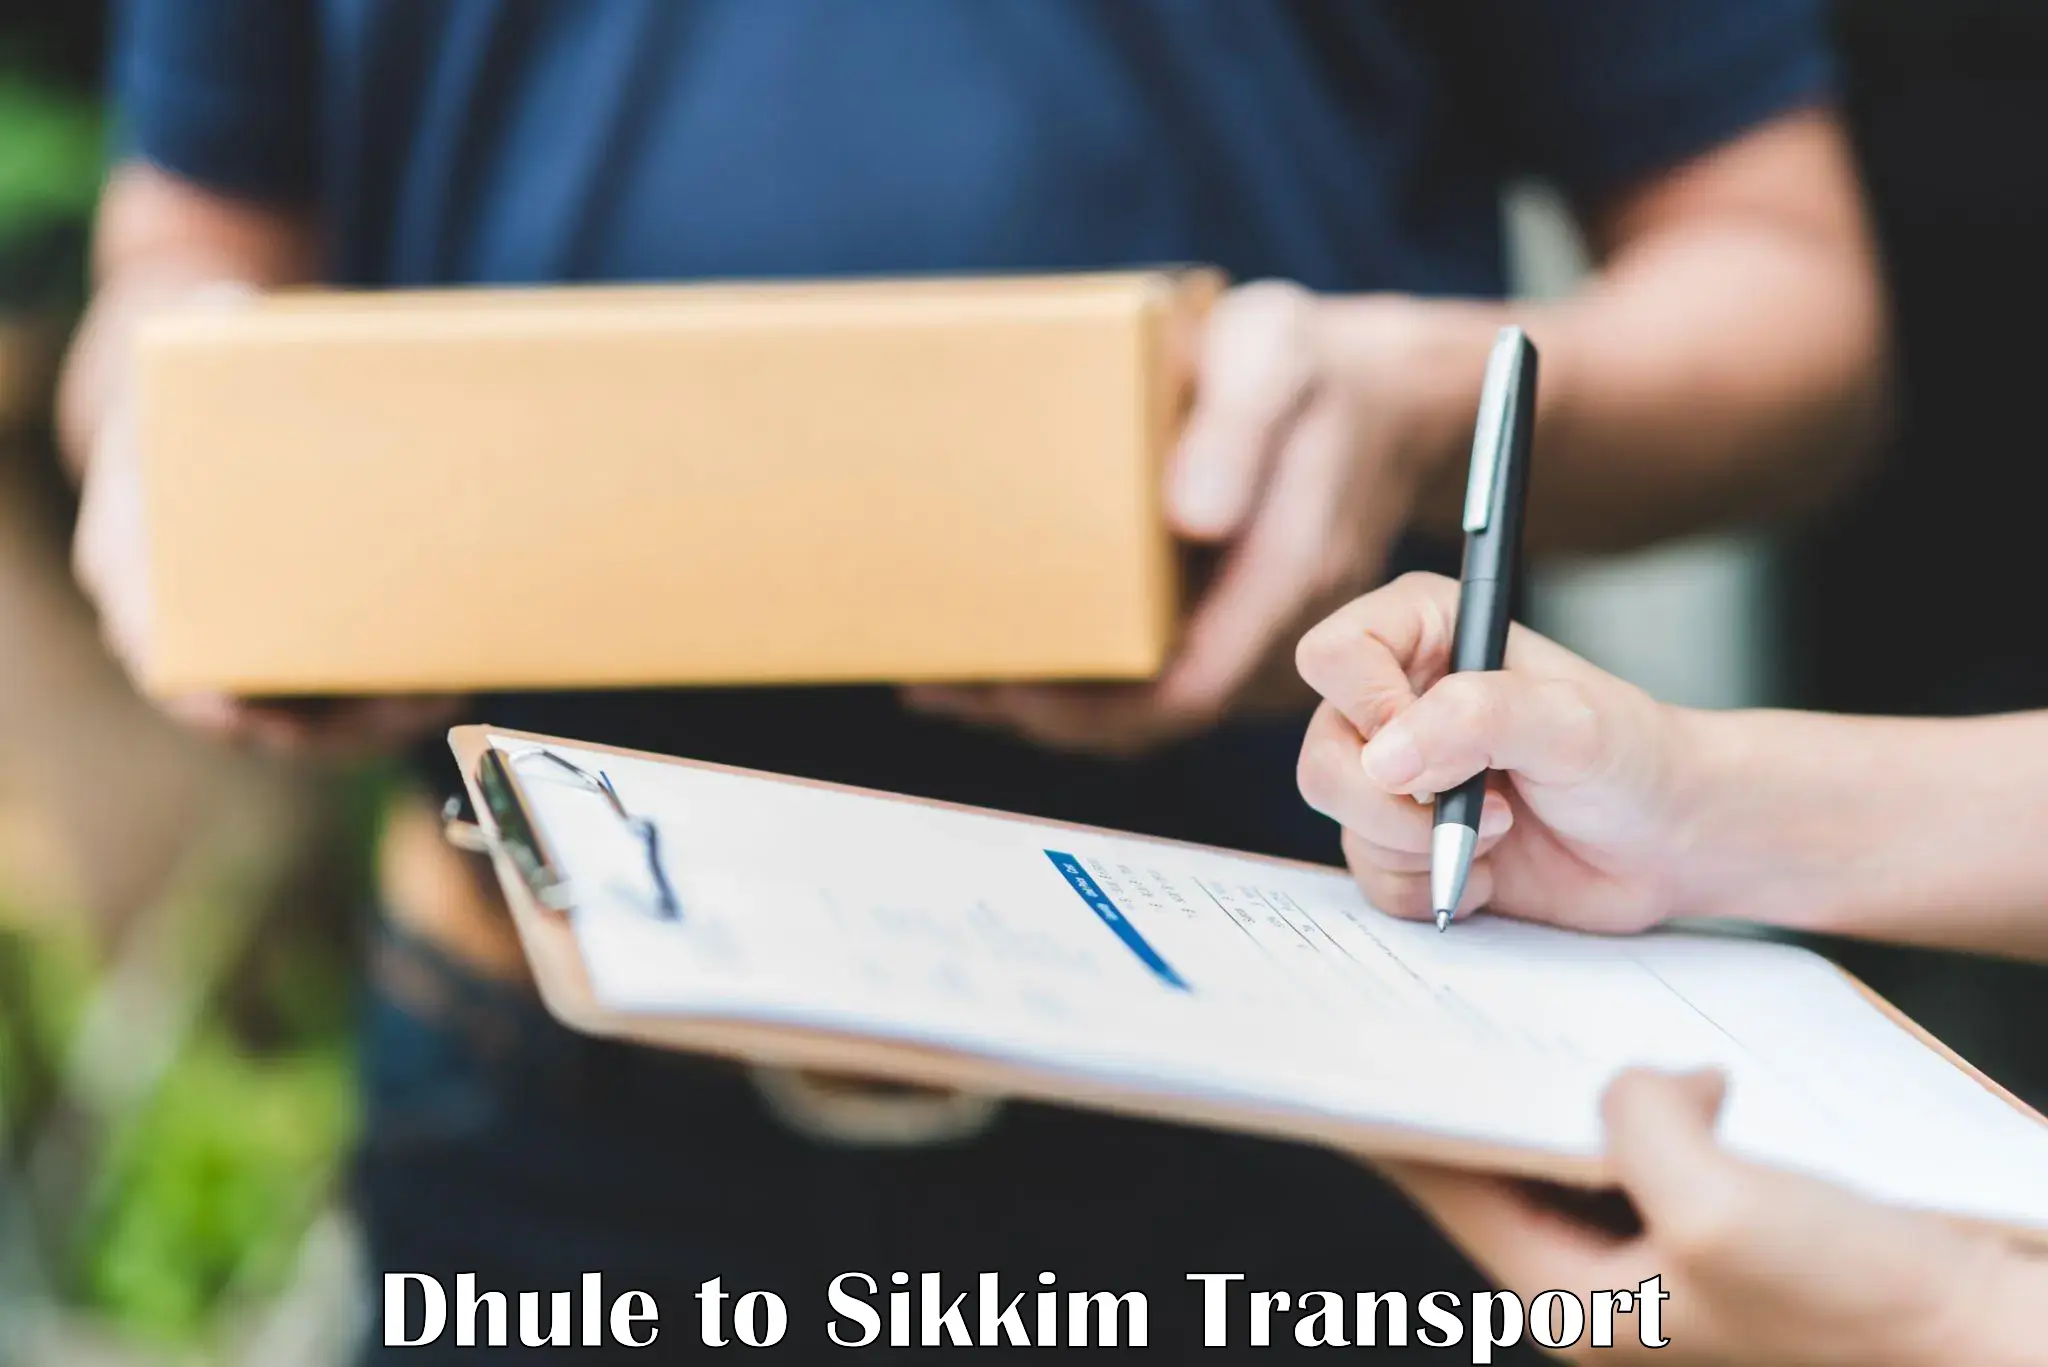 Commercial transport service Dhule to Sikkim